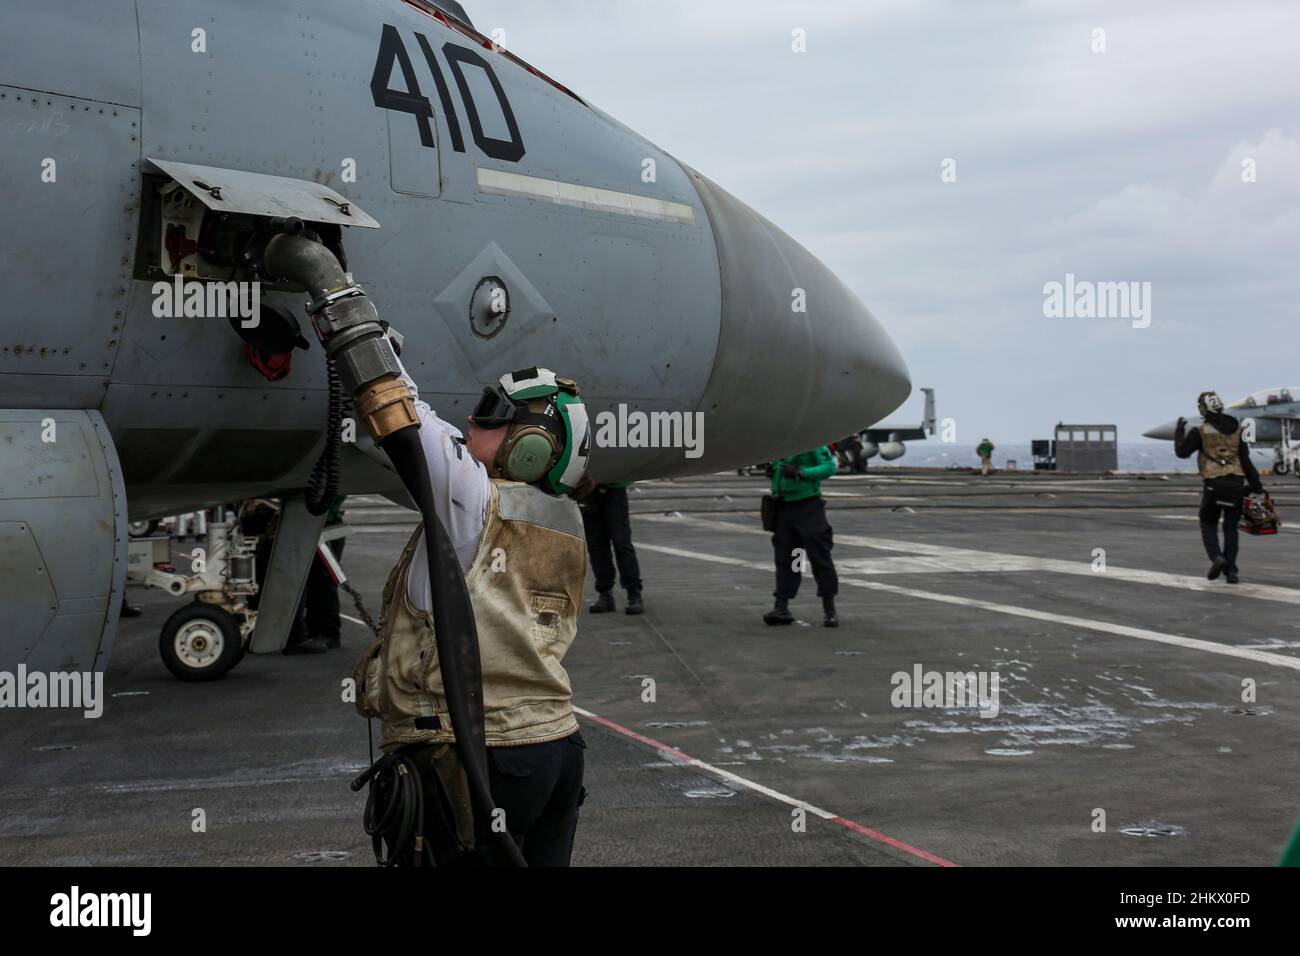 PHILIPPINE SEA (Feb. 5, 2022) Aviation Electronics Technician 2nd Class Alycia  Starr, from Greensboro, N.C., assigned to the “Vigilantes” of Strike  Fighter Squadron (VFA) 151, swaps out a control converter for an